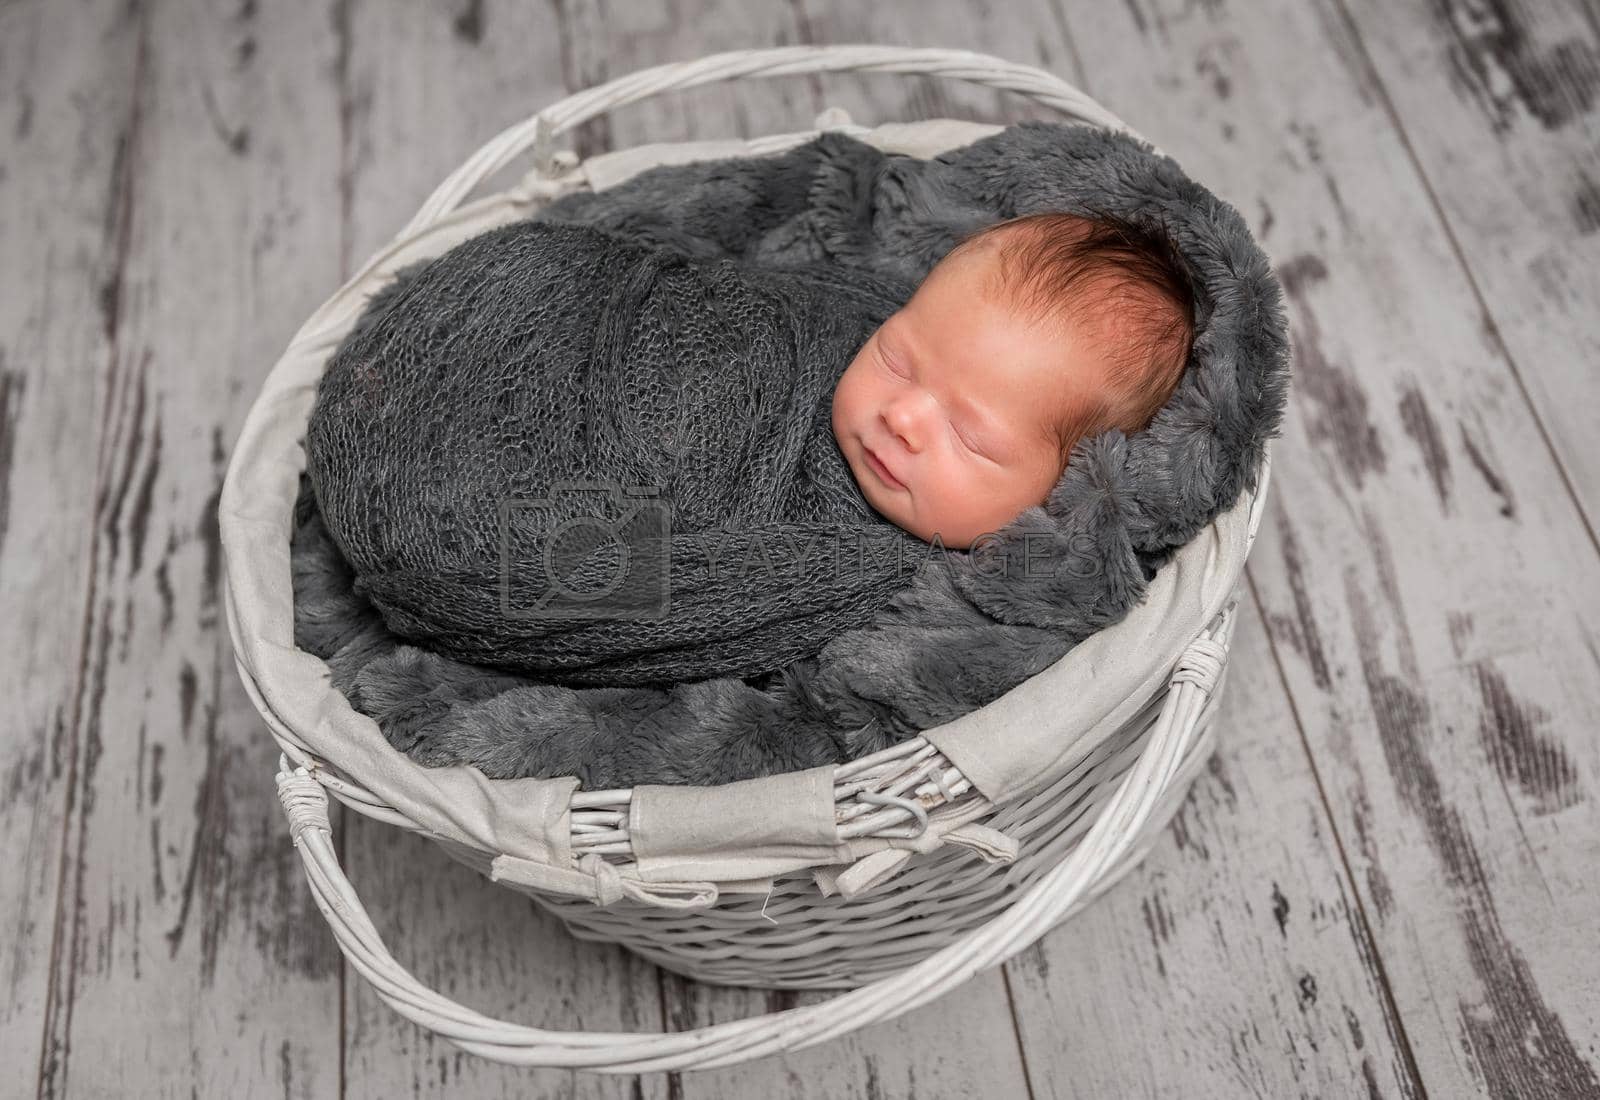 Royalty free image of Innocent infant napping in cradle by tan4ikk1